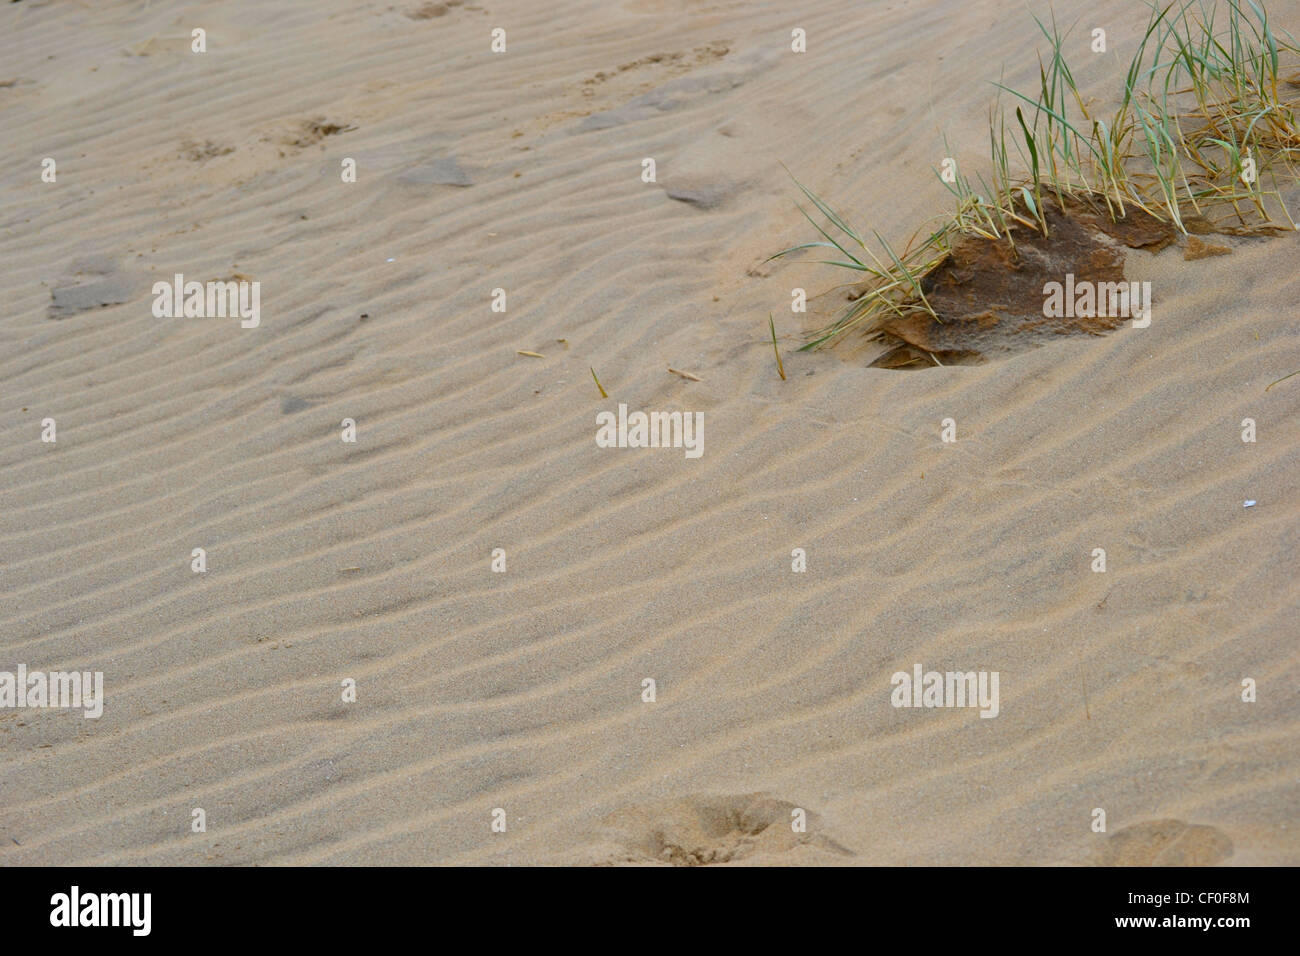 Abstract Patterns in the sand and beach grass on the Dunes of Camber Sands in East Sussex Stock Photo